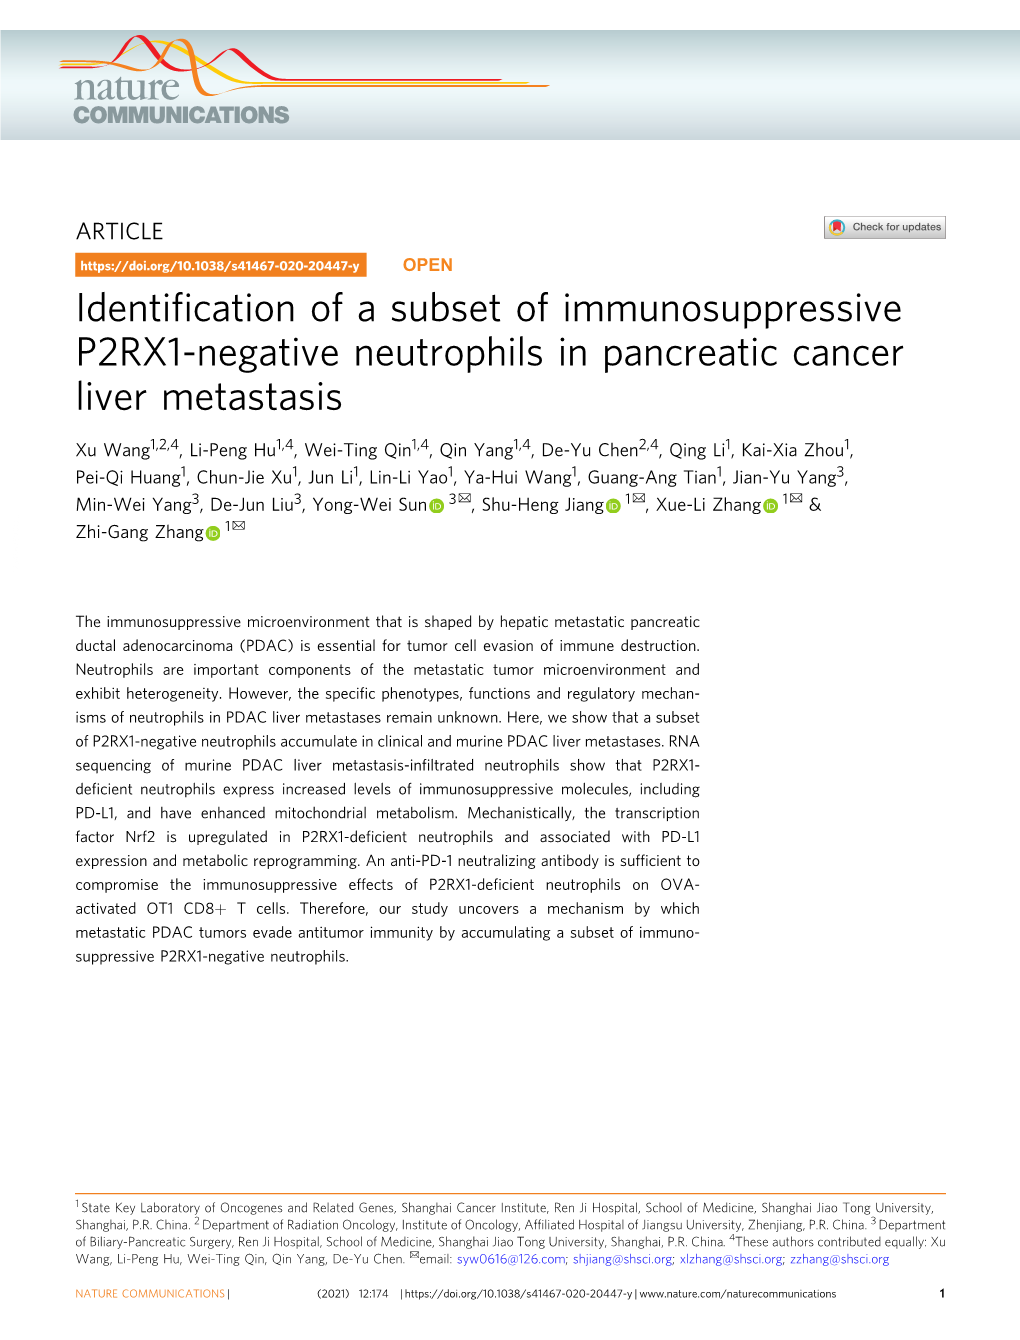 Identification of a Subset of Immunosuppressive P2RX1